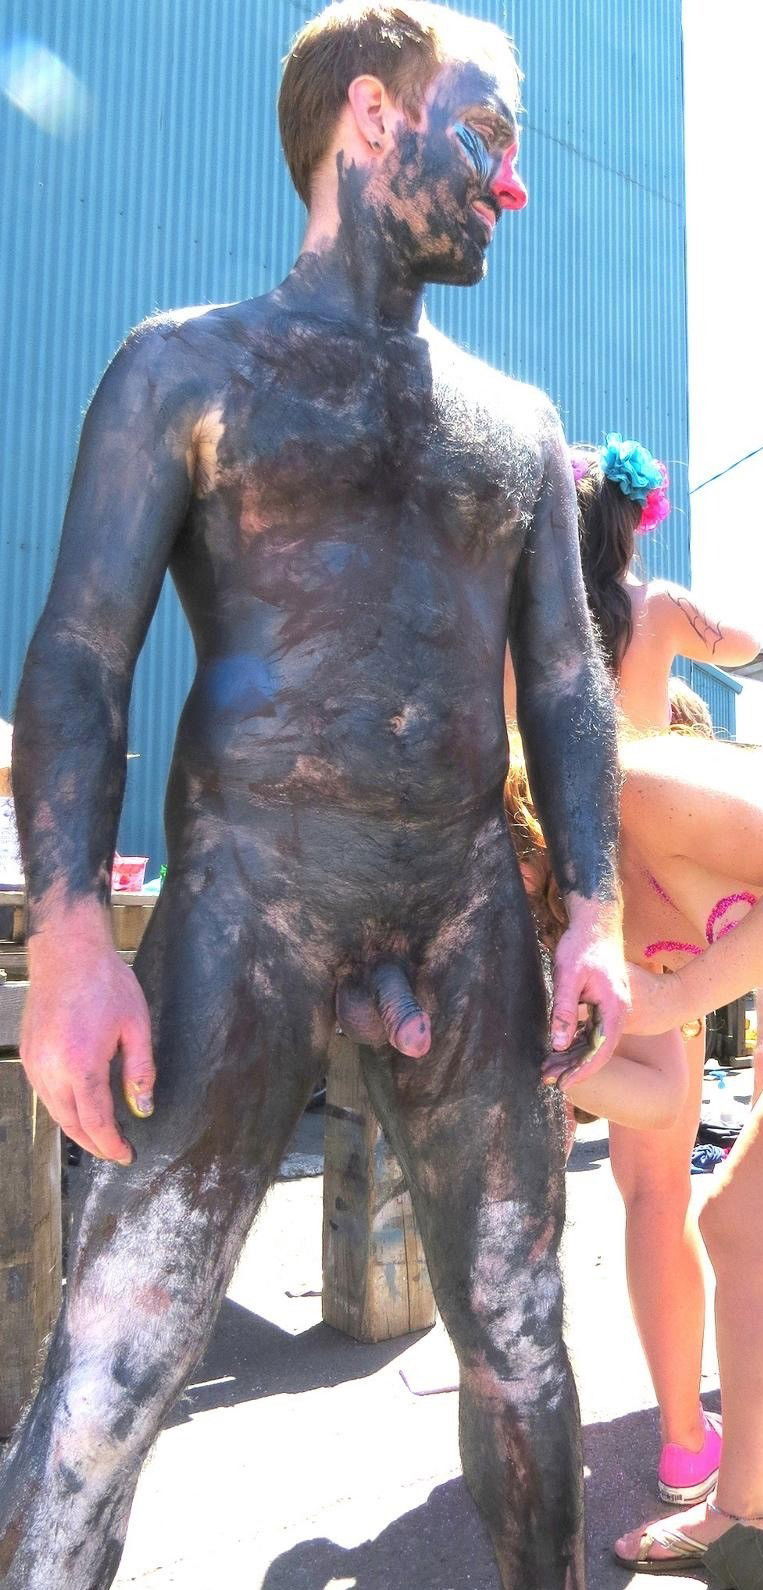 Watch the Photo by midswysiwyg78 with the username @midswysiwyg78, who is a verified user, posted on December 30, 2018. The post is about the topic Naked men in mud.